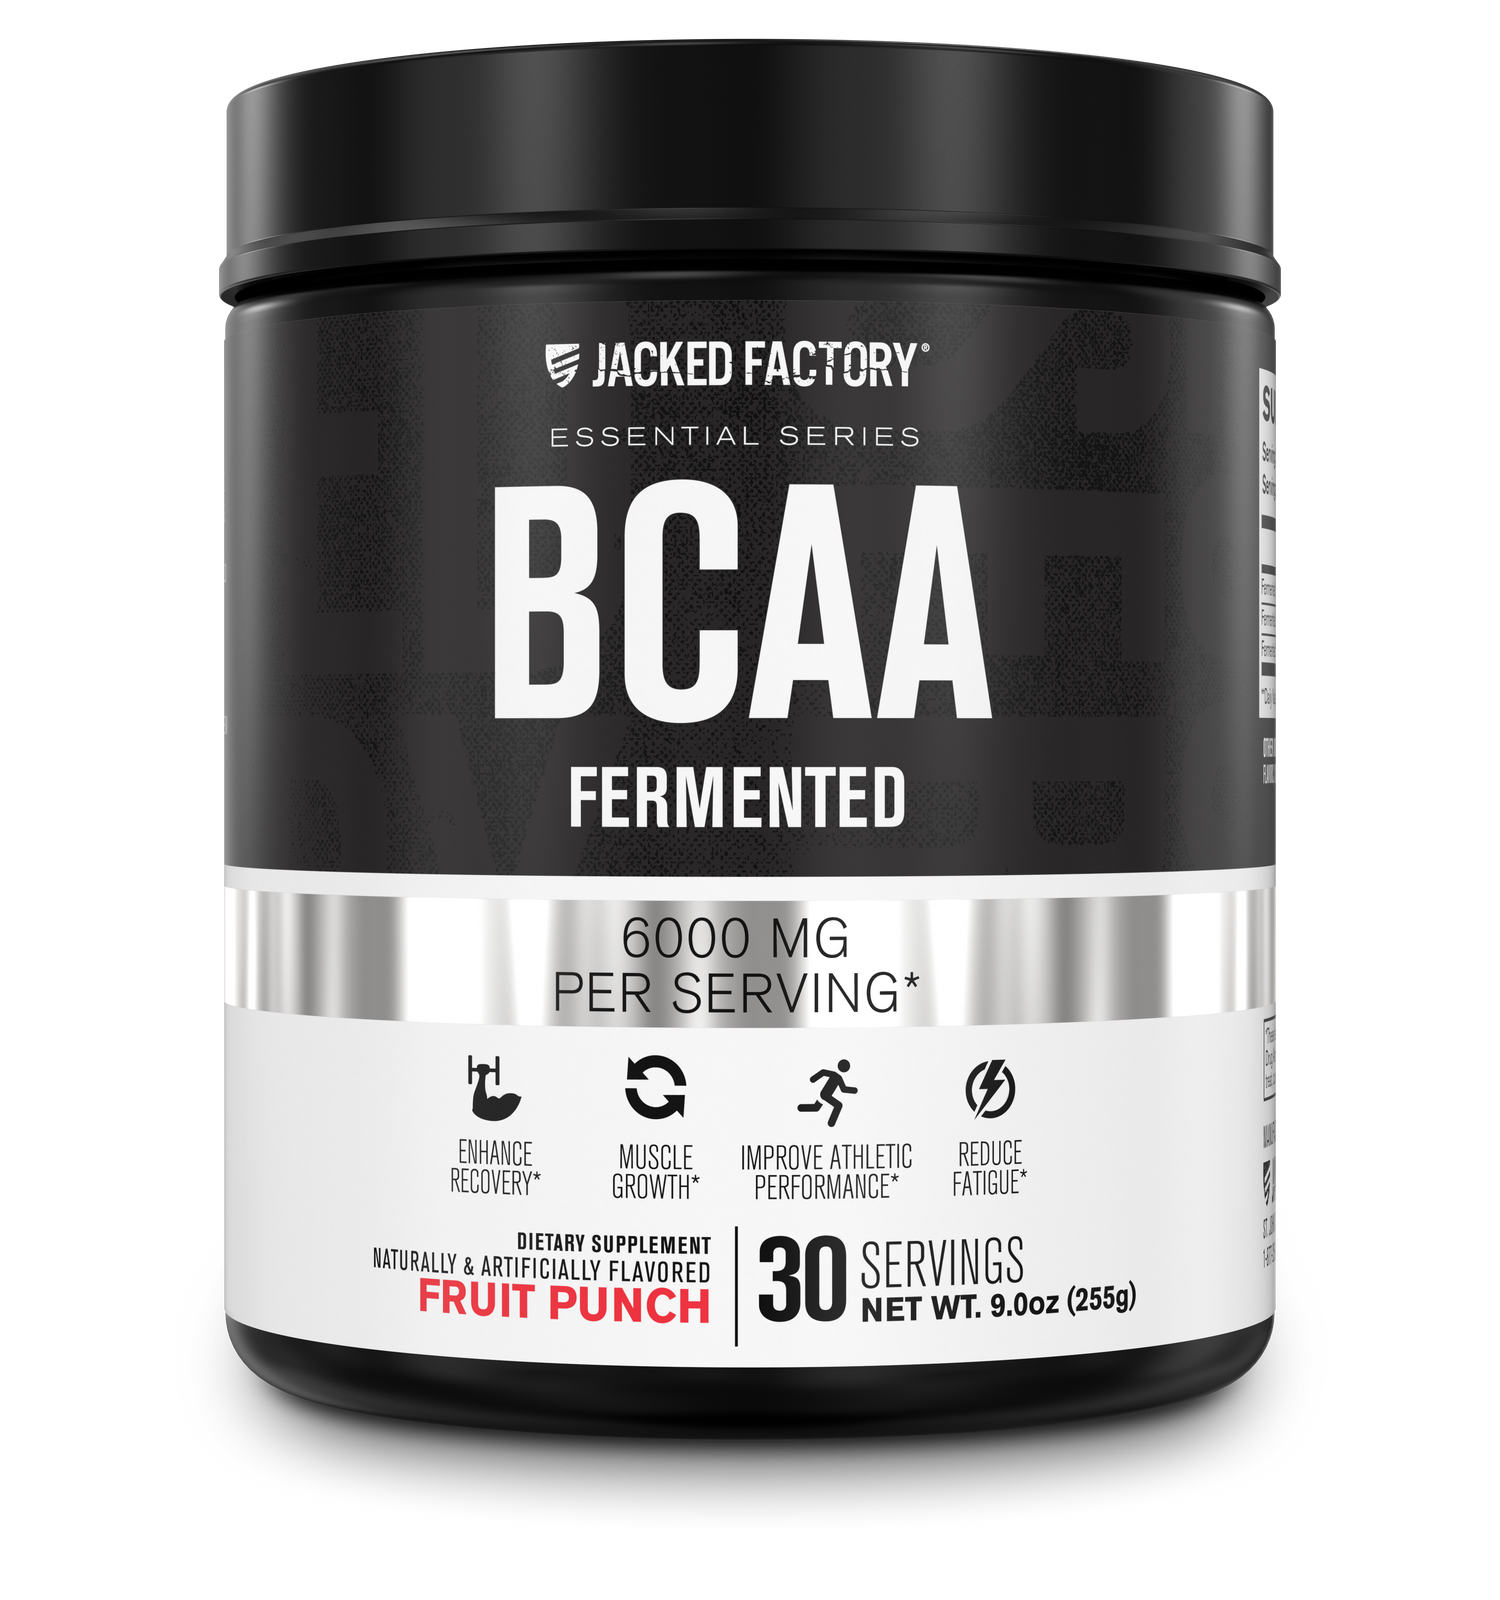 Jacked Factory's 30 servings fruit punch BCAA Fermented 6000mg in a black bottle with a white and grey label